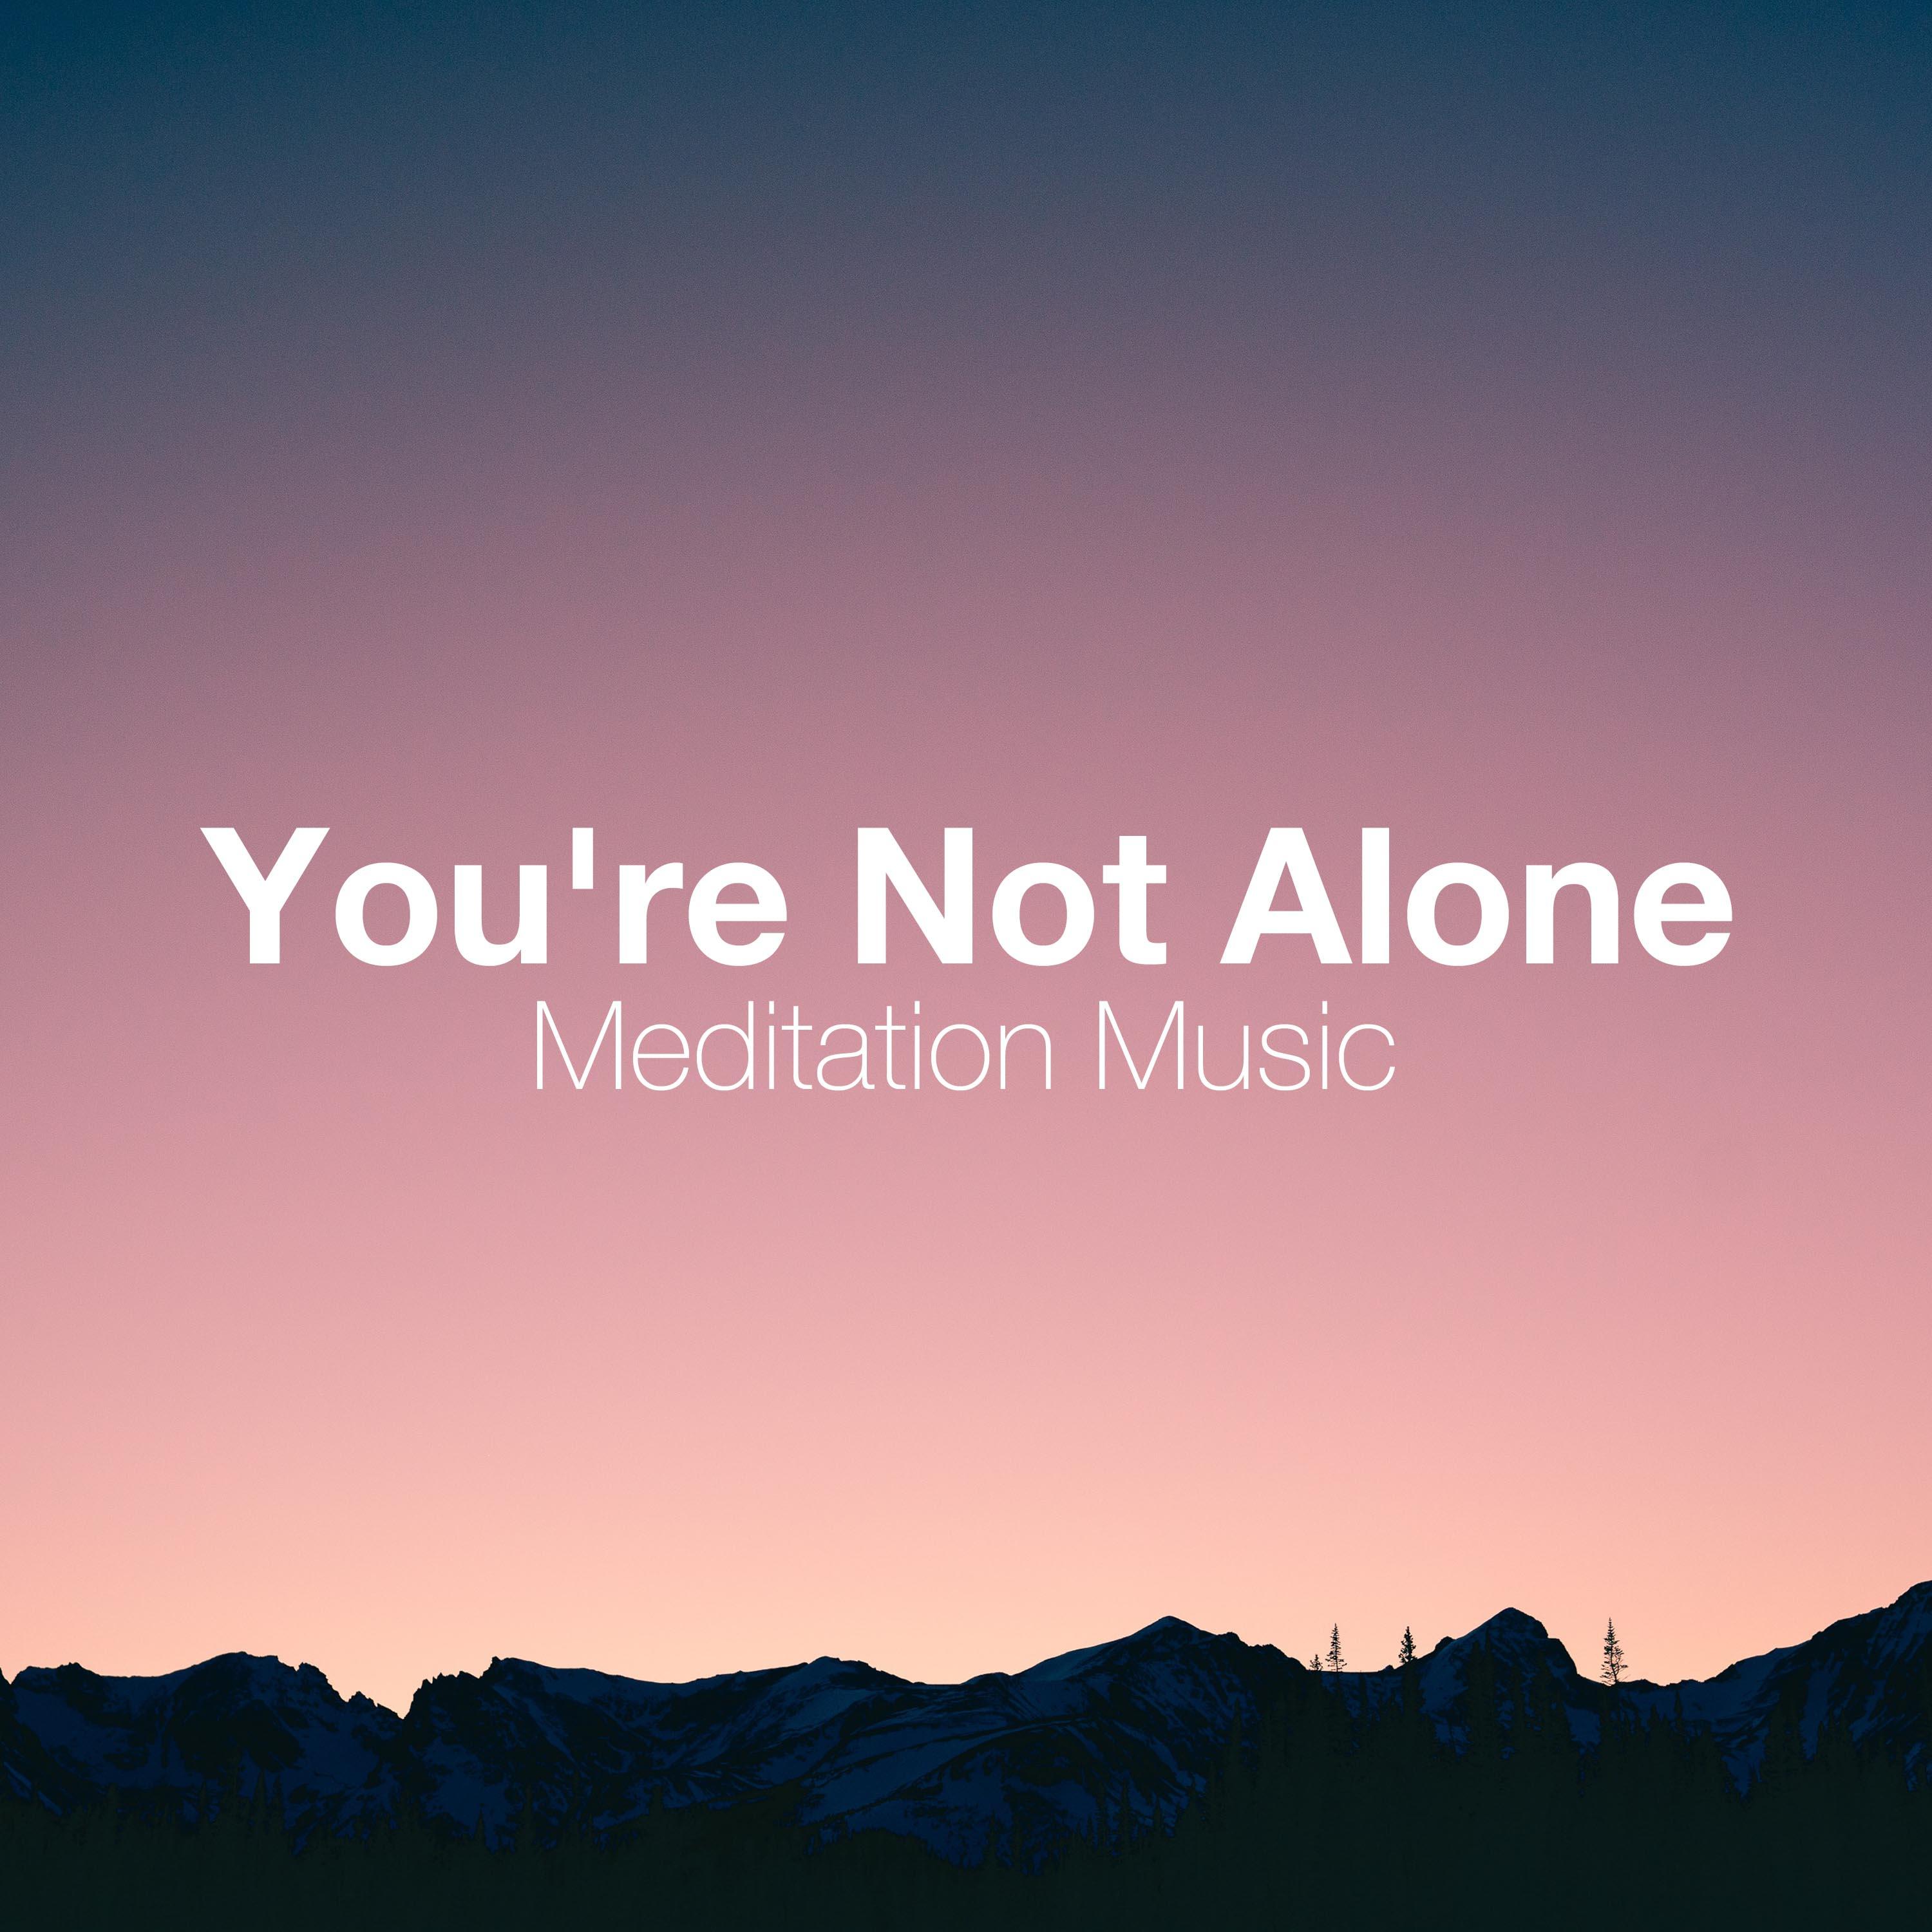 You're Not Alone: Meditation Music, Feel at Peace, Total Freedom, Nature Sounds, Confusion and Clarity